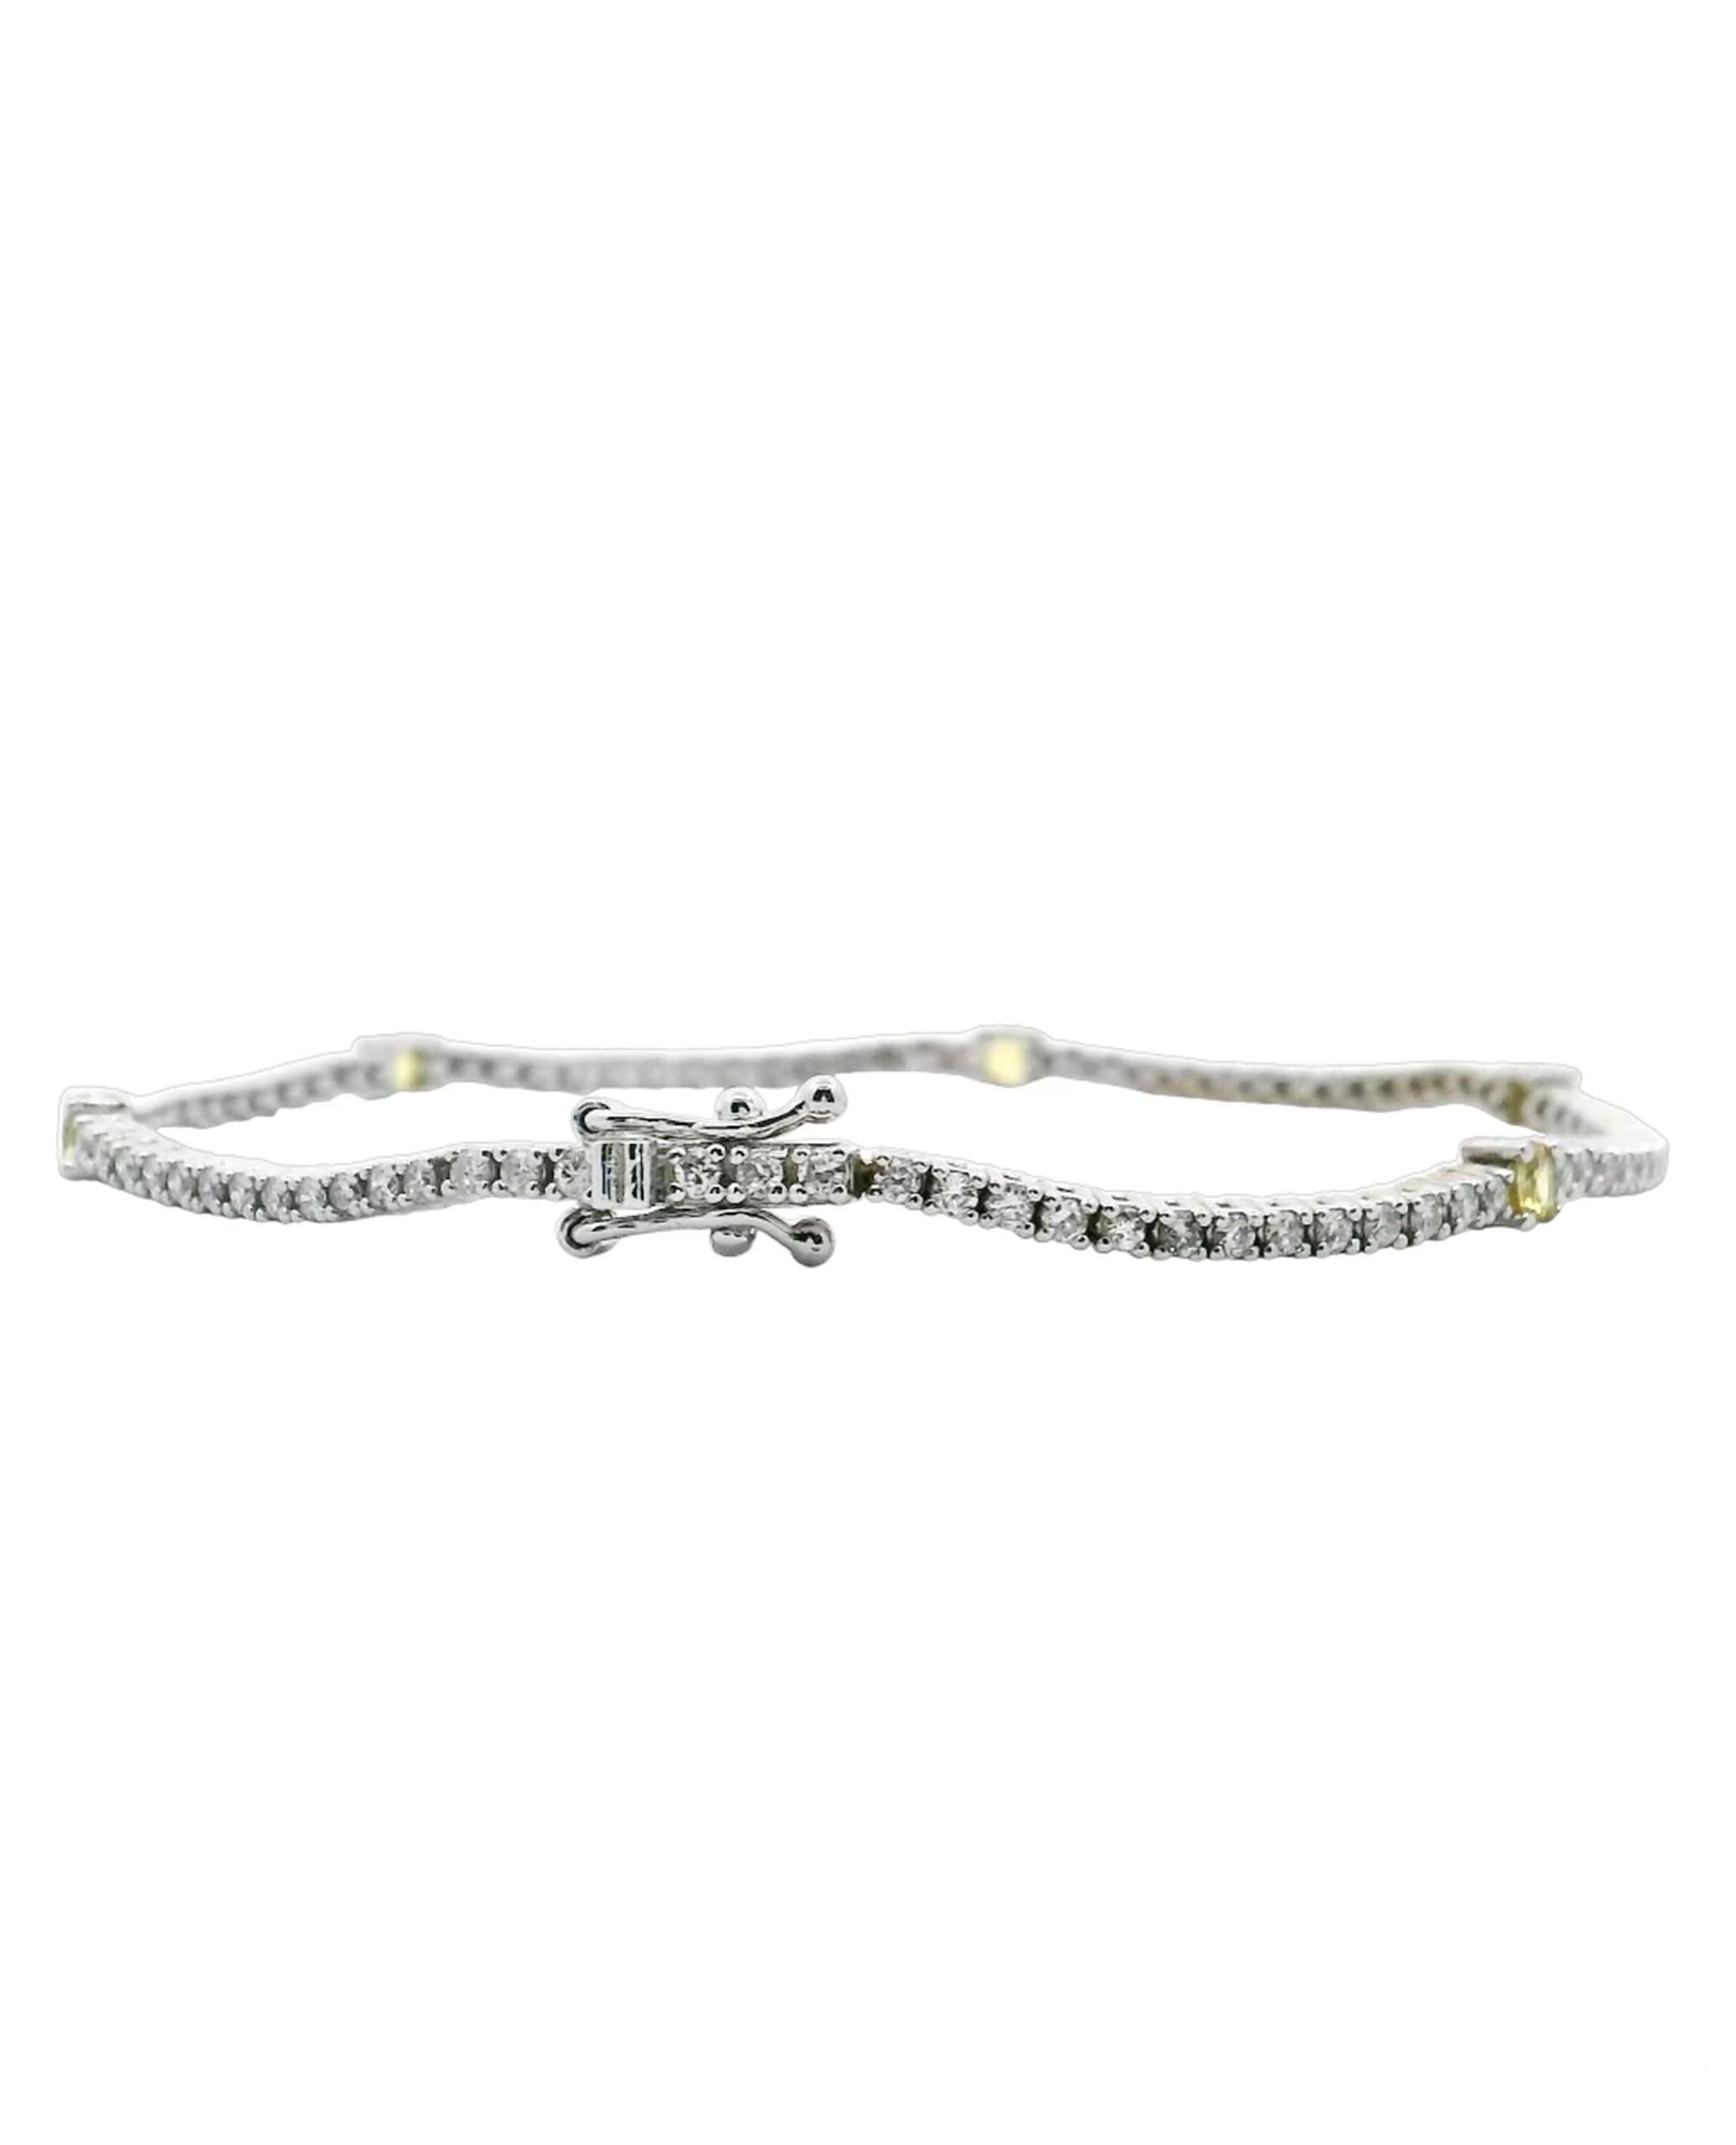 14K white gold tennis bracelet with 87 round brilliant-cut diamonds weighing 1.50 carats total and 5 round faceted yellow sapphires weighing 0.70 carats total.

- The bracelet is 7 inches long and has two figure eight safety clasps.